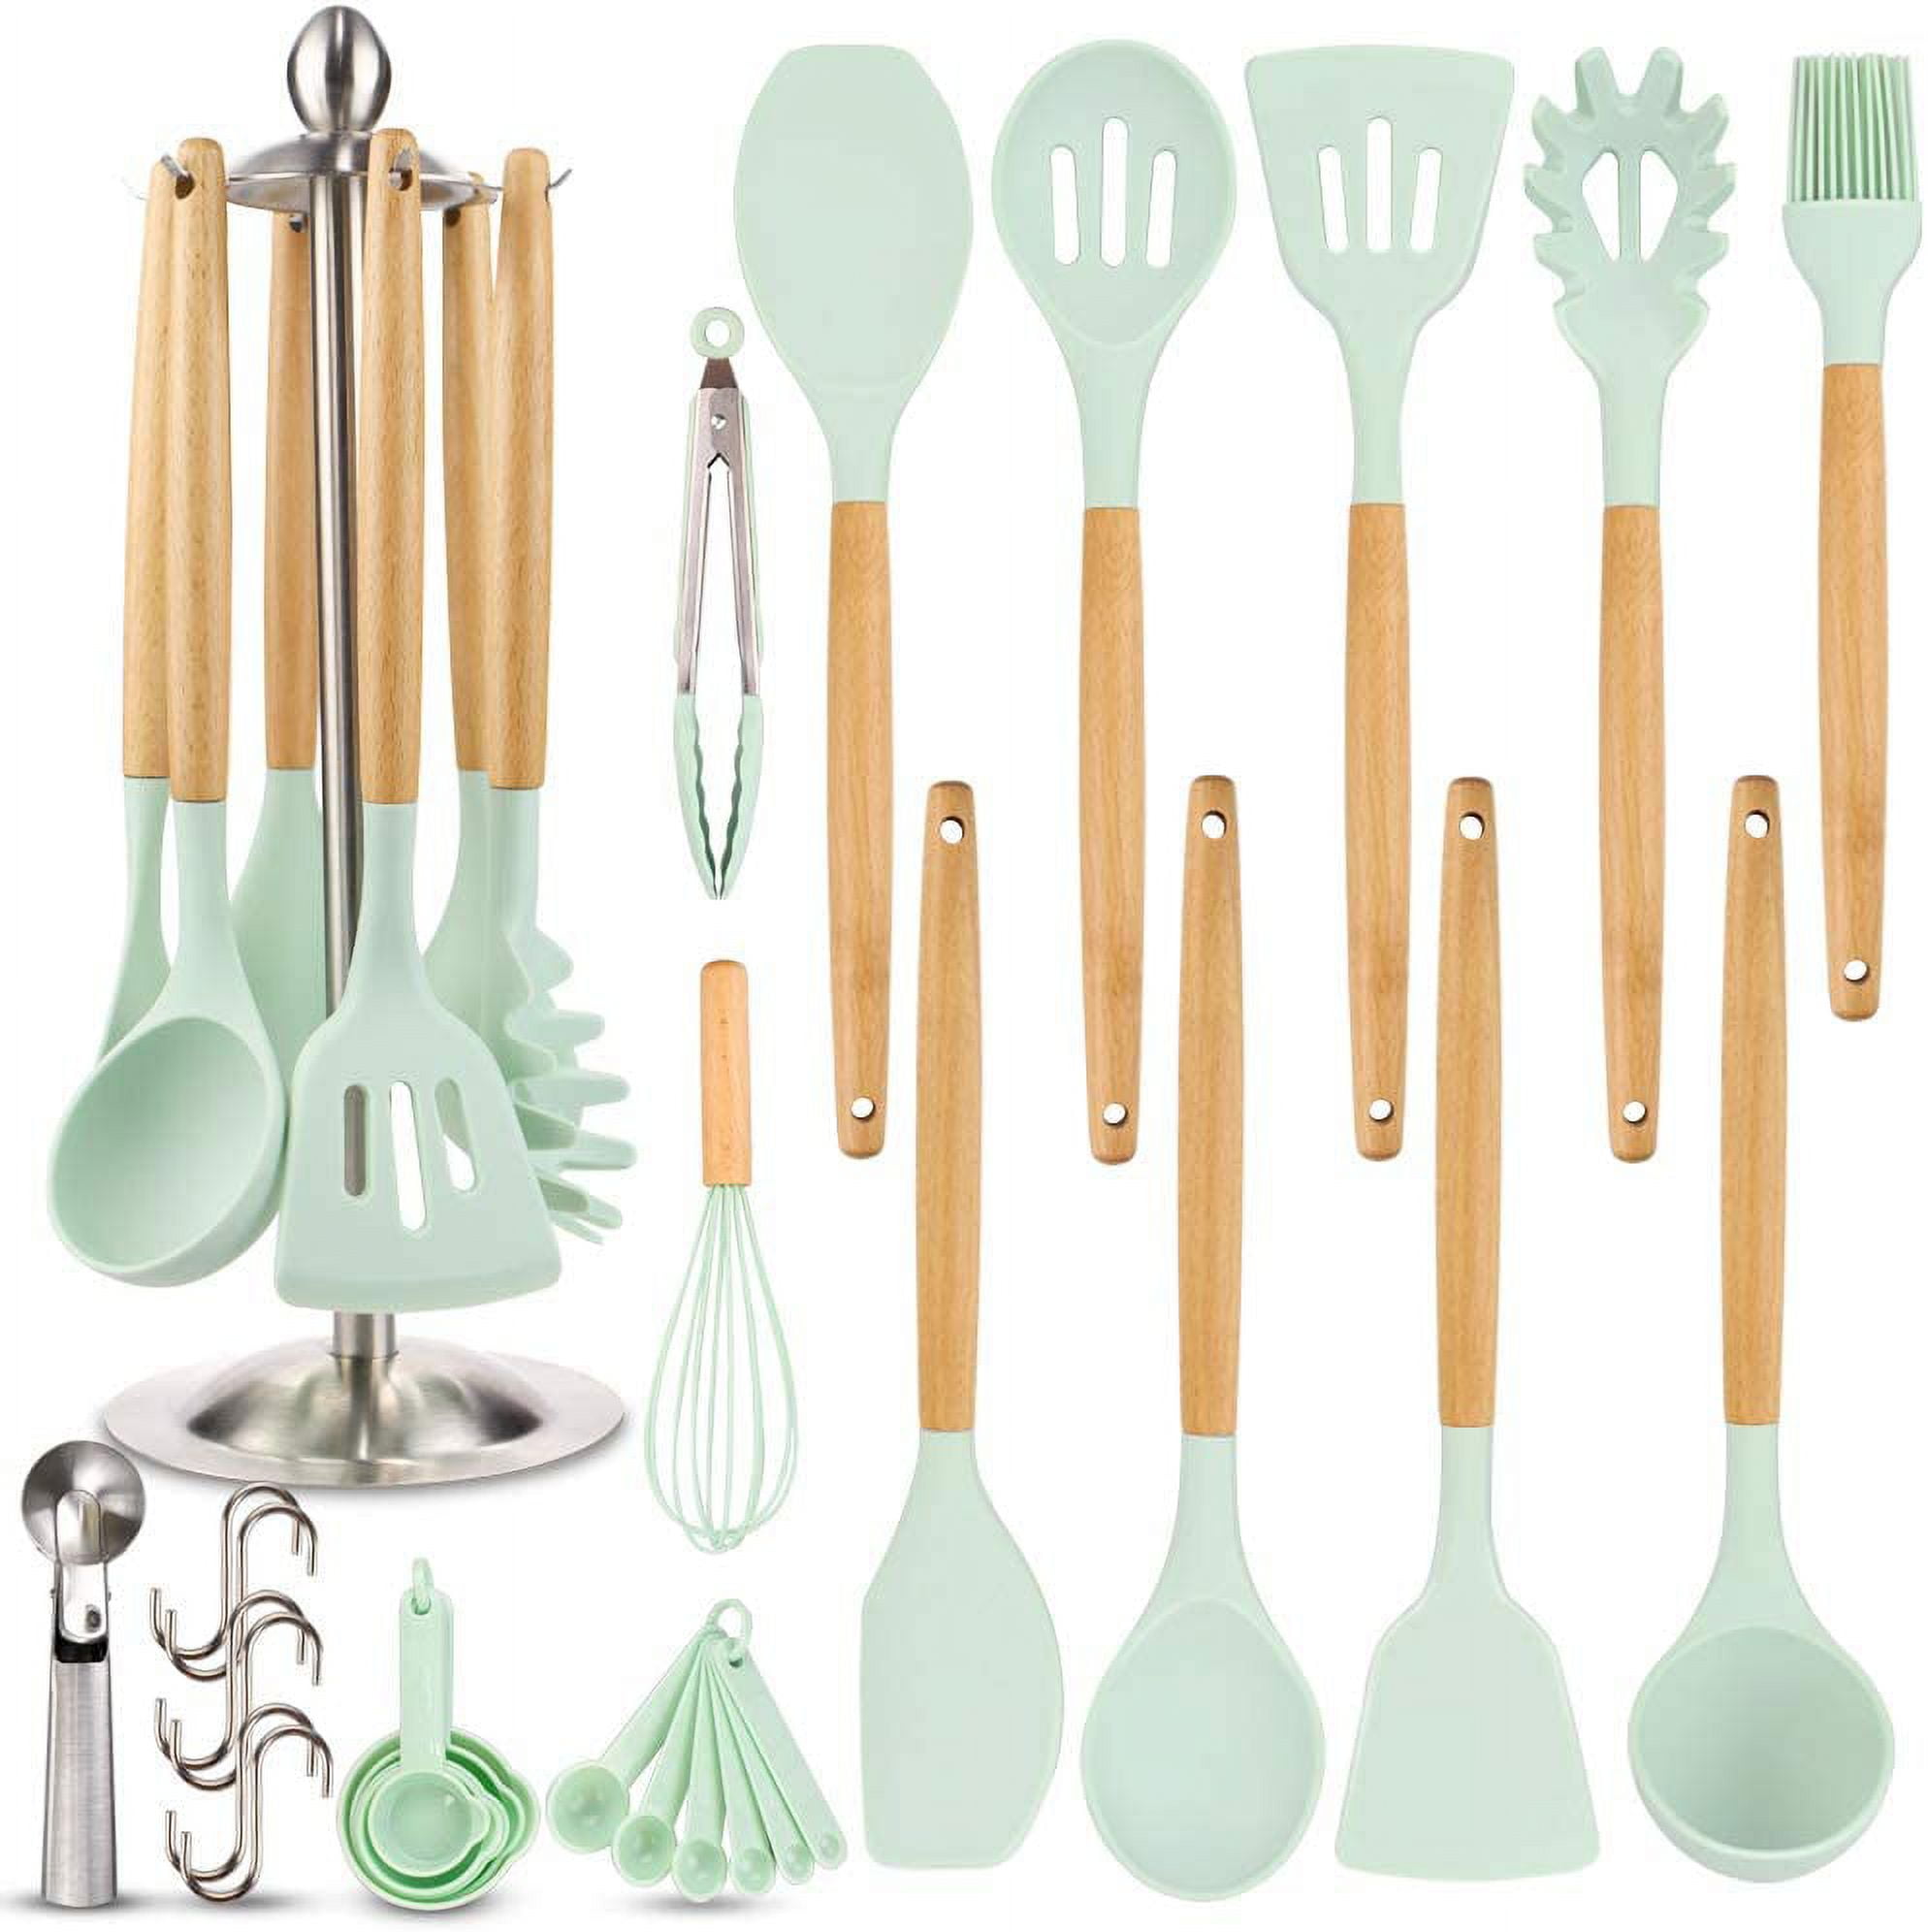  MYKUJA Green Kitchen Utensils Set for Cooking-Heat Resistant  Kitchen Silicone Set Cooking Utensils Set for Non-Stick Utensils Set 13  Pieces Kitchen Tools(Avocado green) : Home & Kitchen